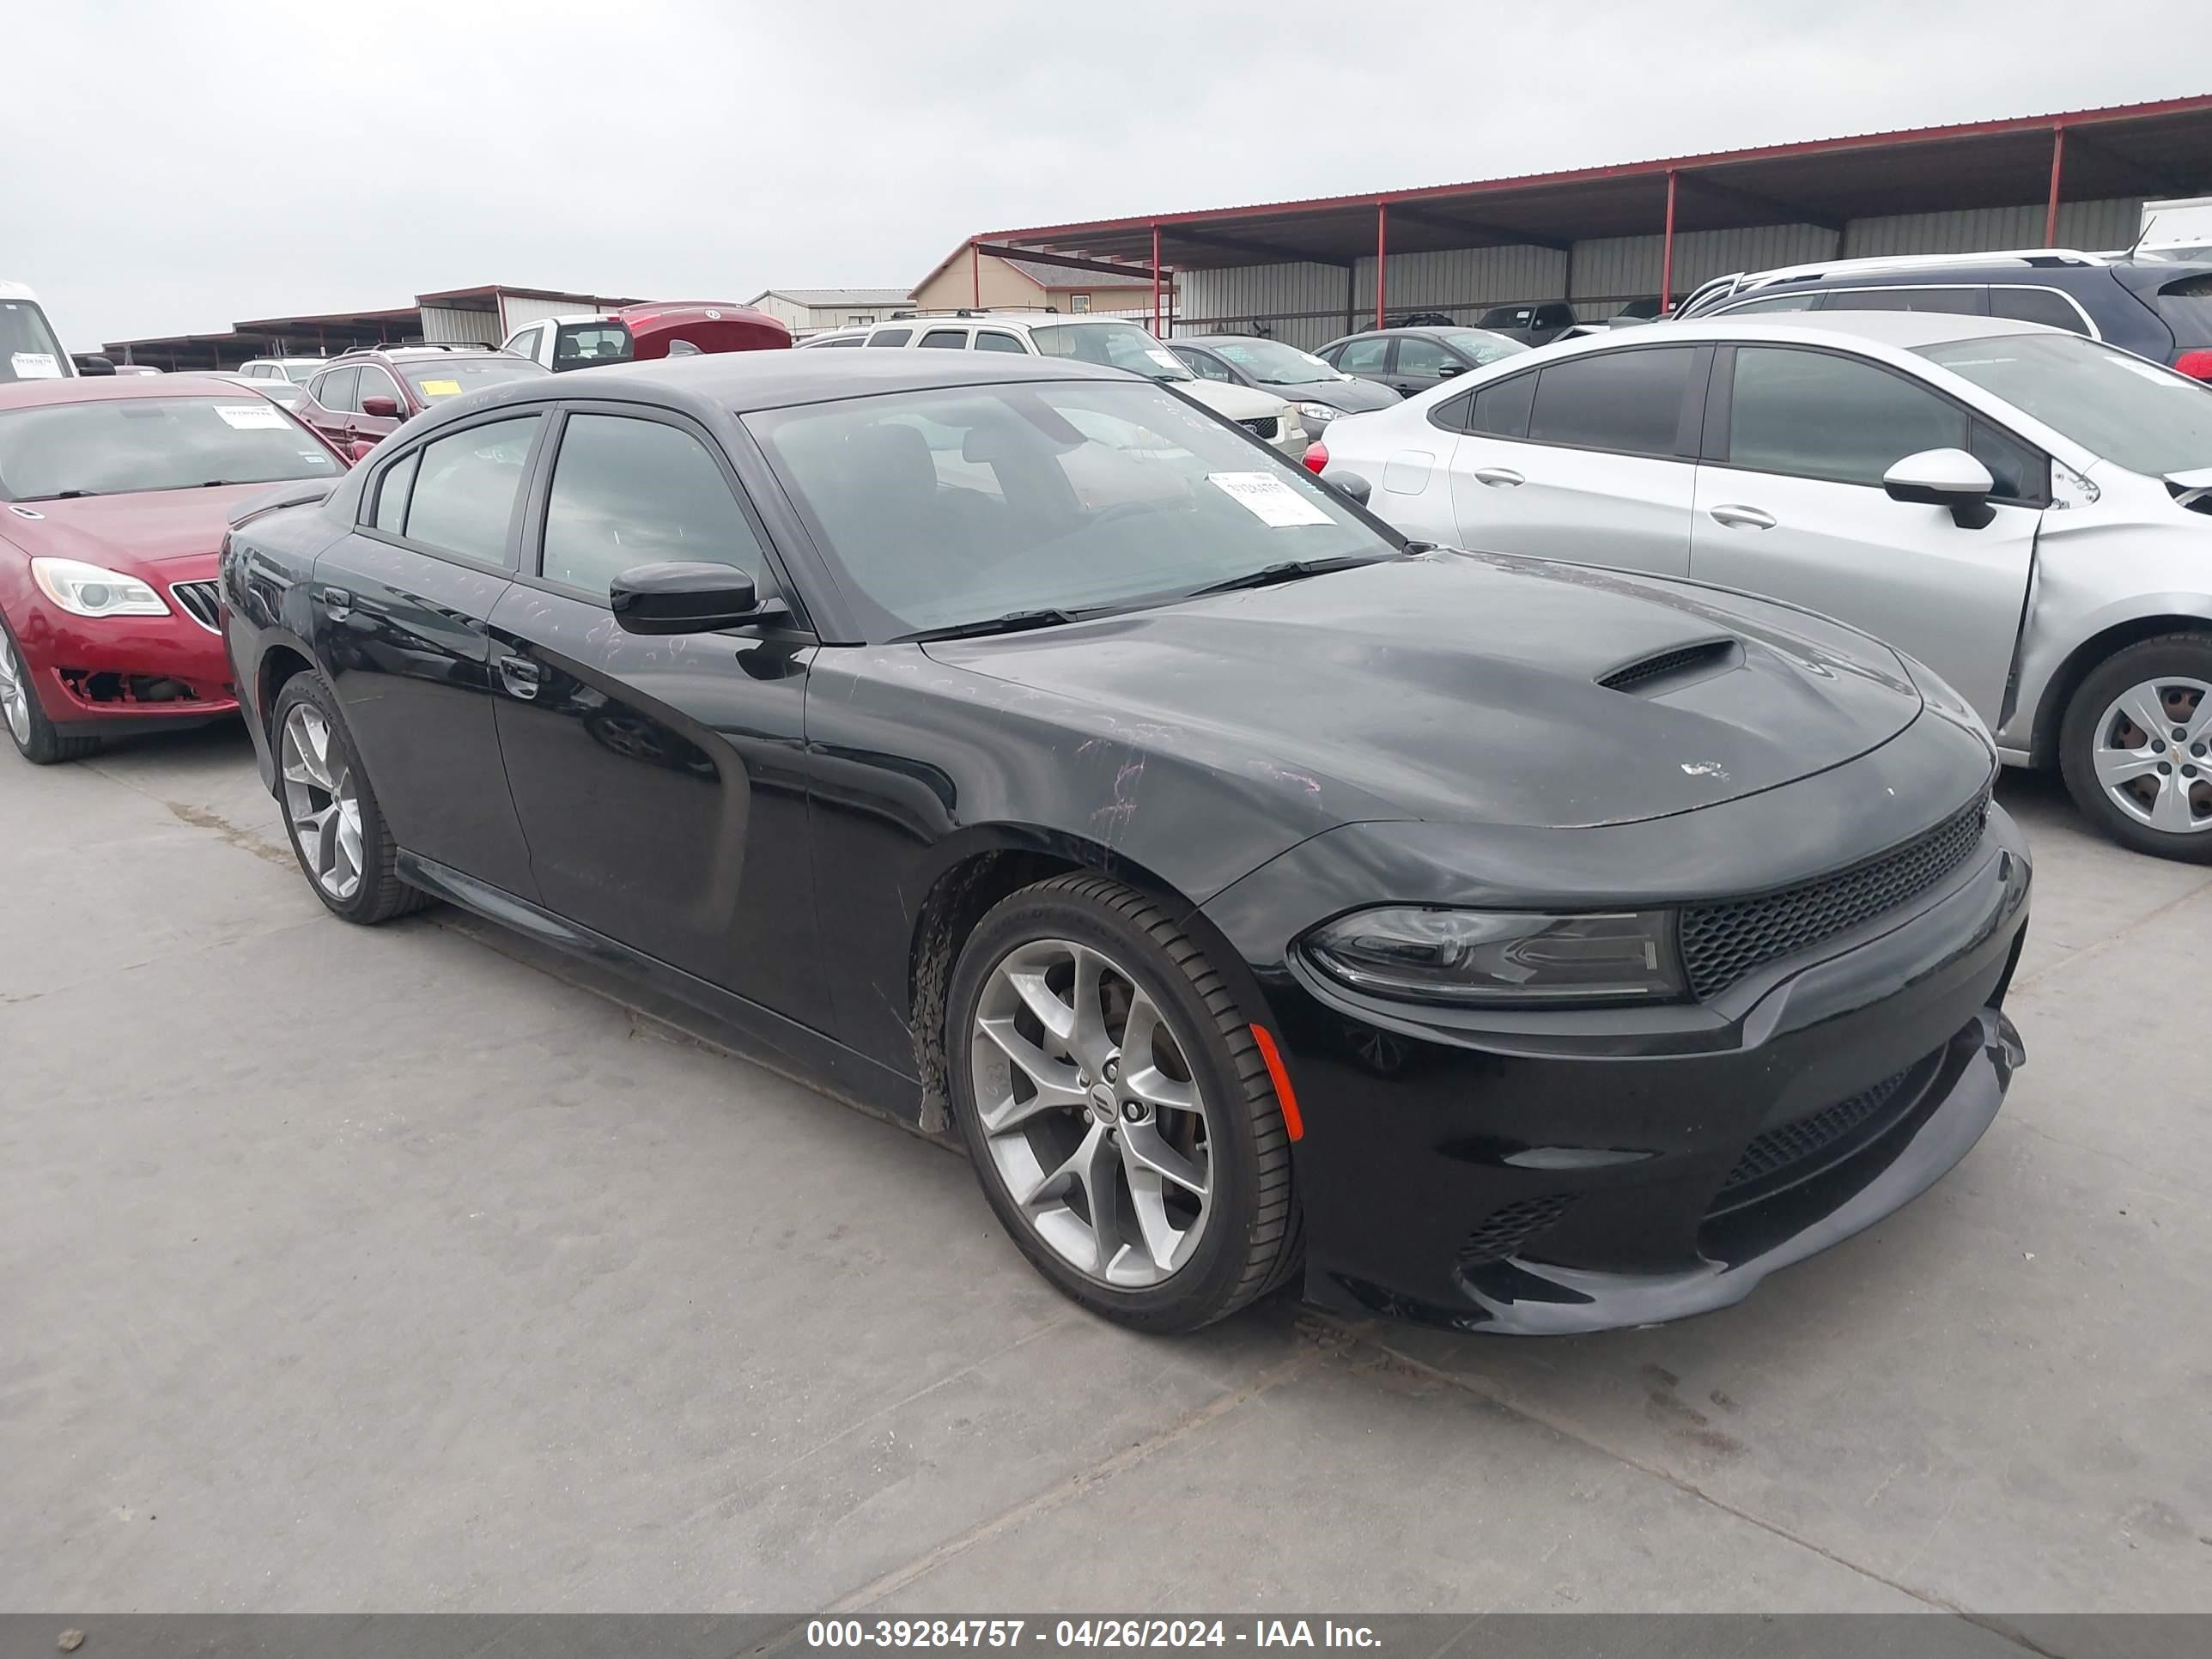 vin: 2C3CDXHGXPH606704 2C3CDXHGXPH606704 2023 dodge charger 3600 for Sale in 78616, 2191 Highway 21 West, Dale, Texas, USA